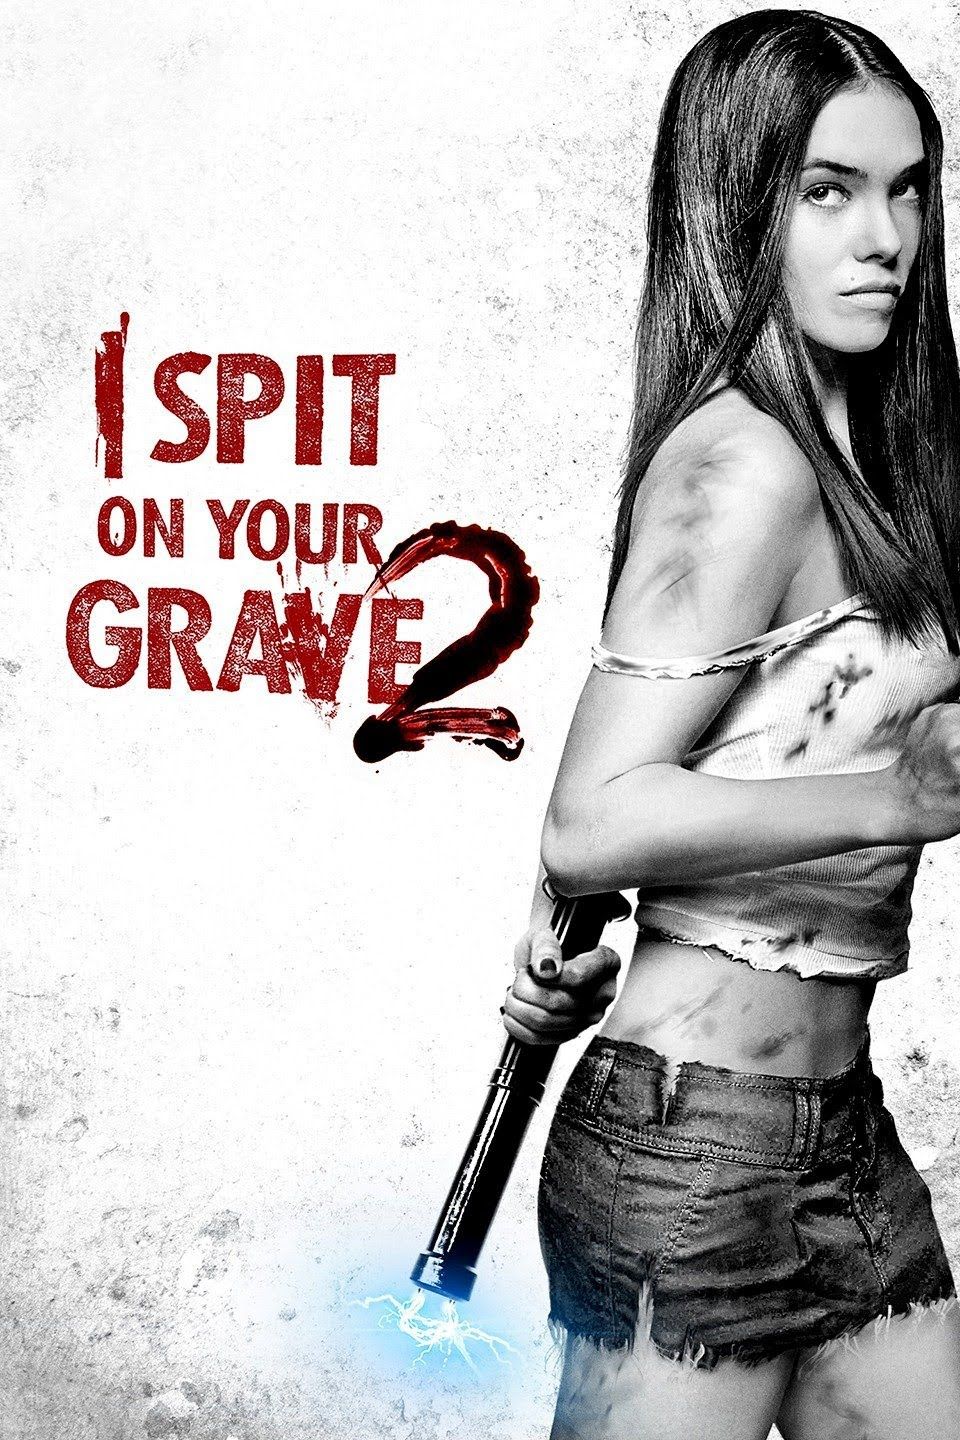 [18+] I Spit on Your Grave 2 (2013) Hindi Dubbed BluRay download full movie